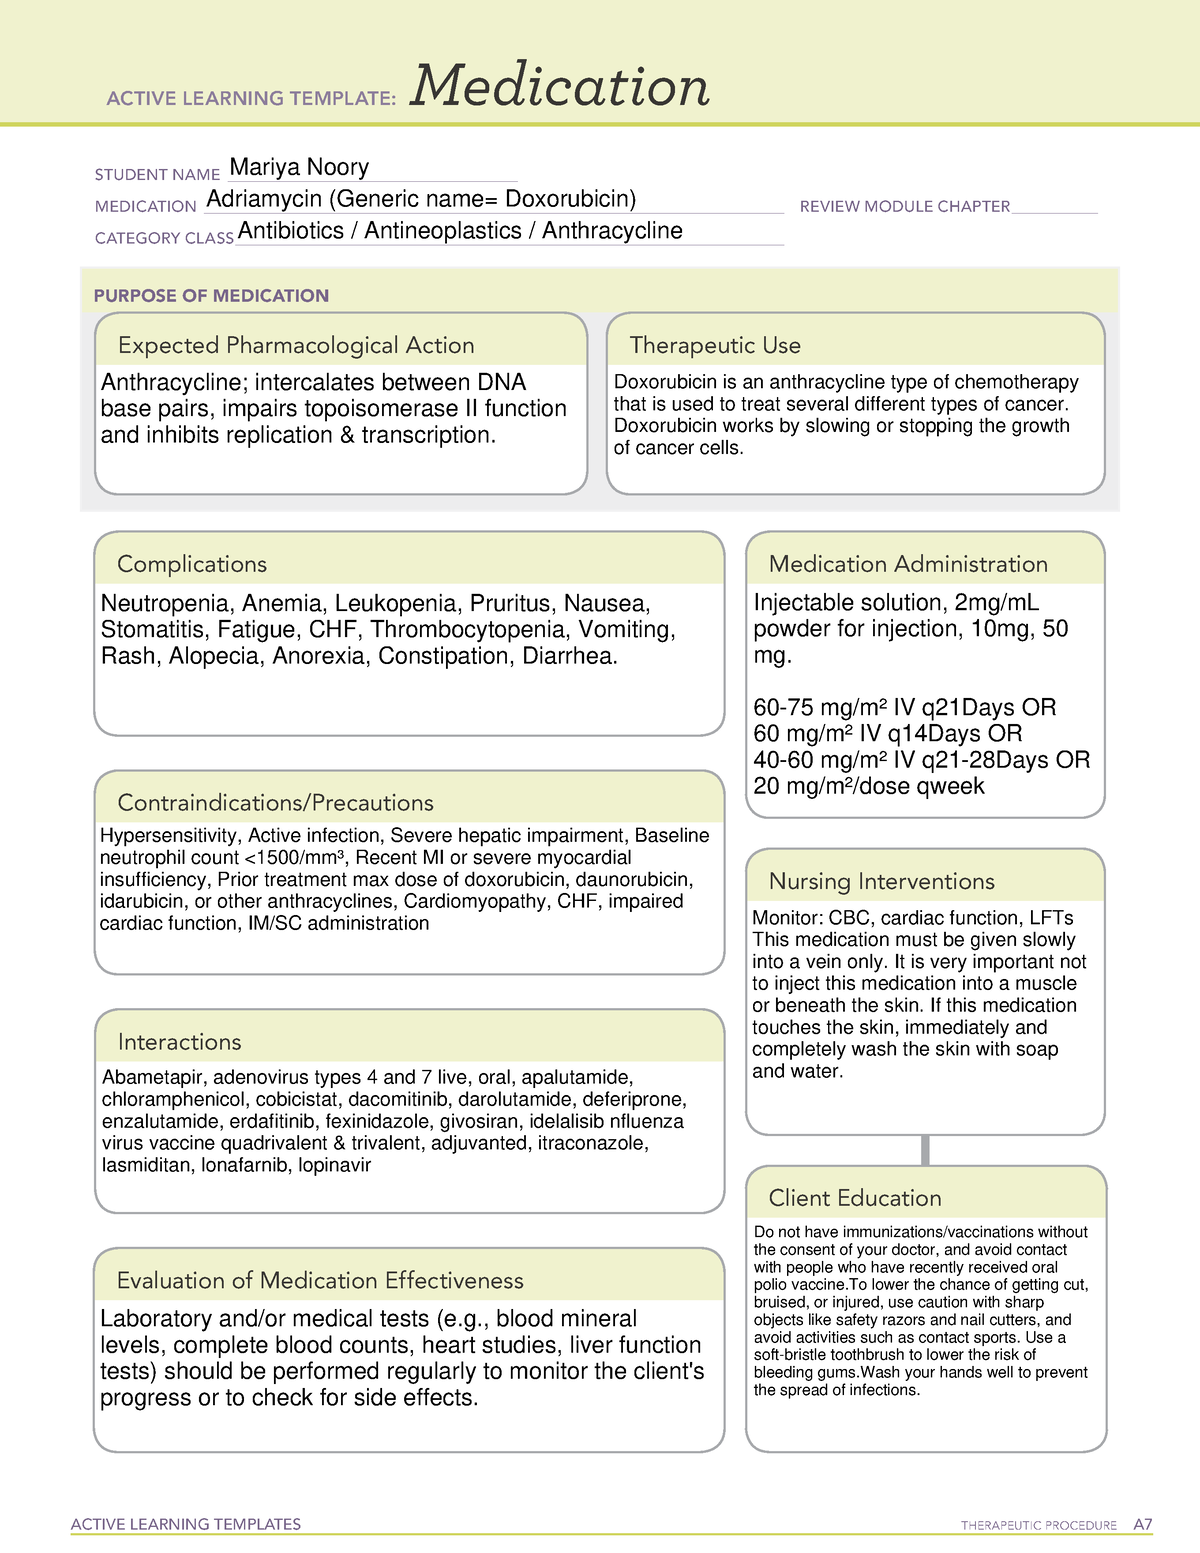 active-learning-template-medication-adriamycin-active-learning-templates-therapeutic-procedure